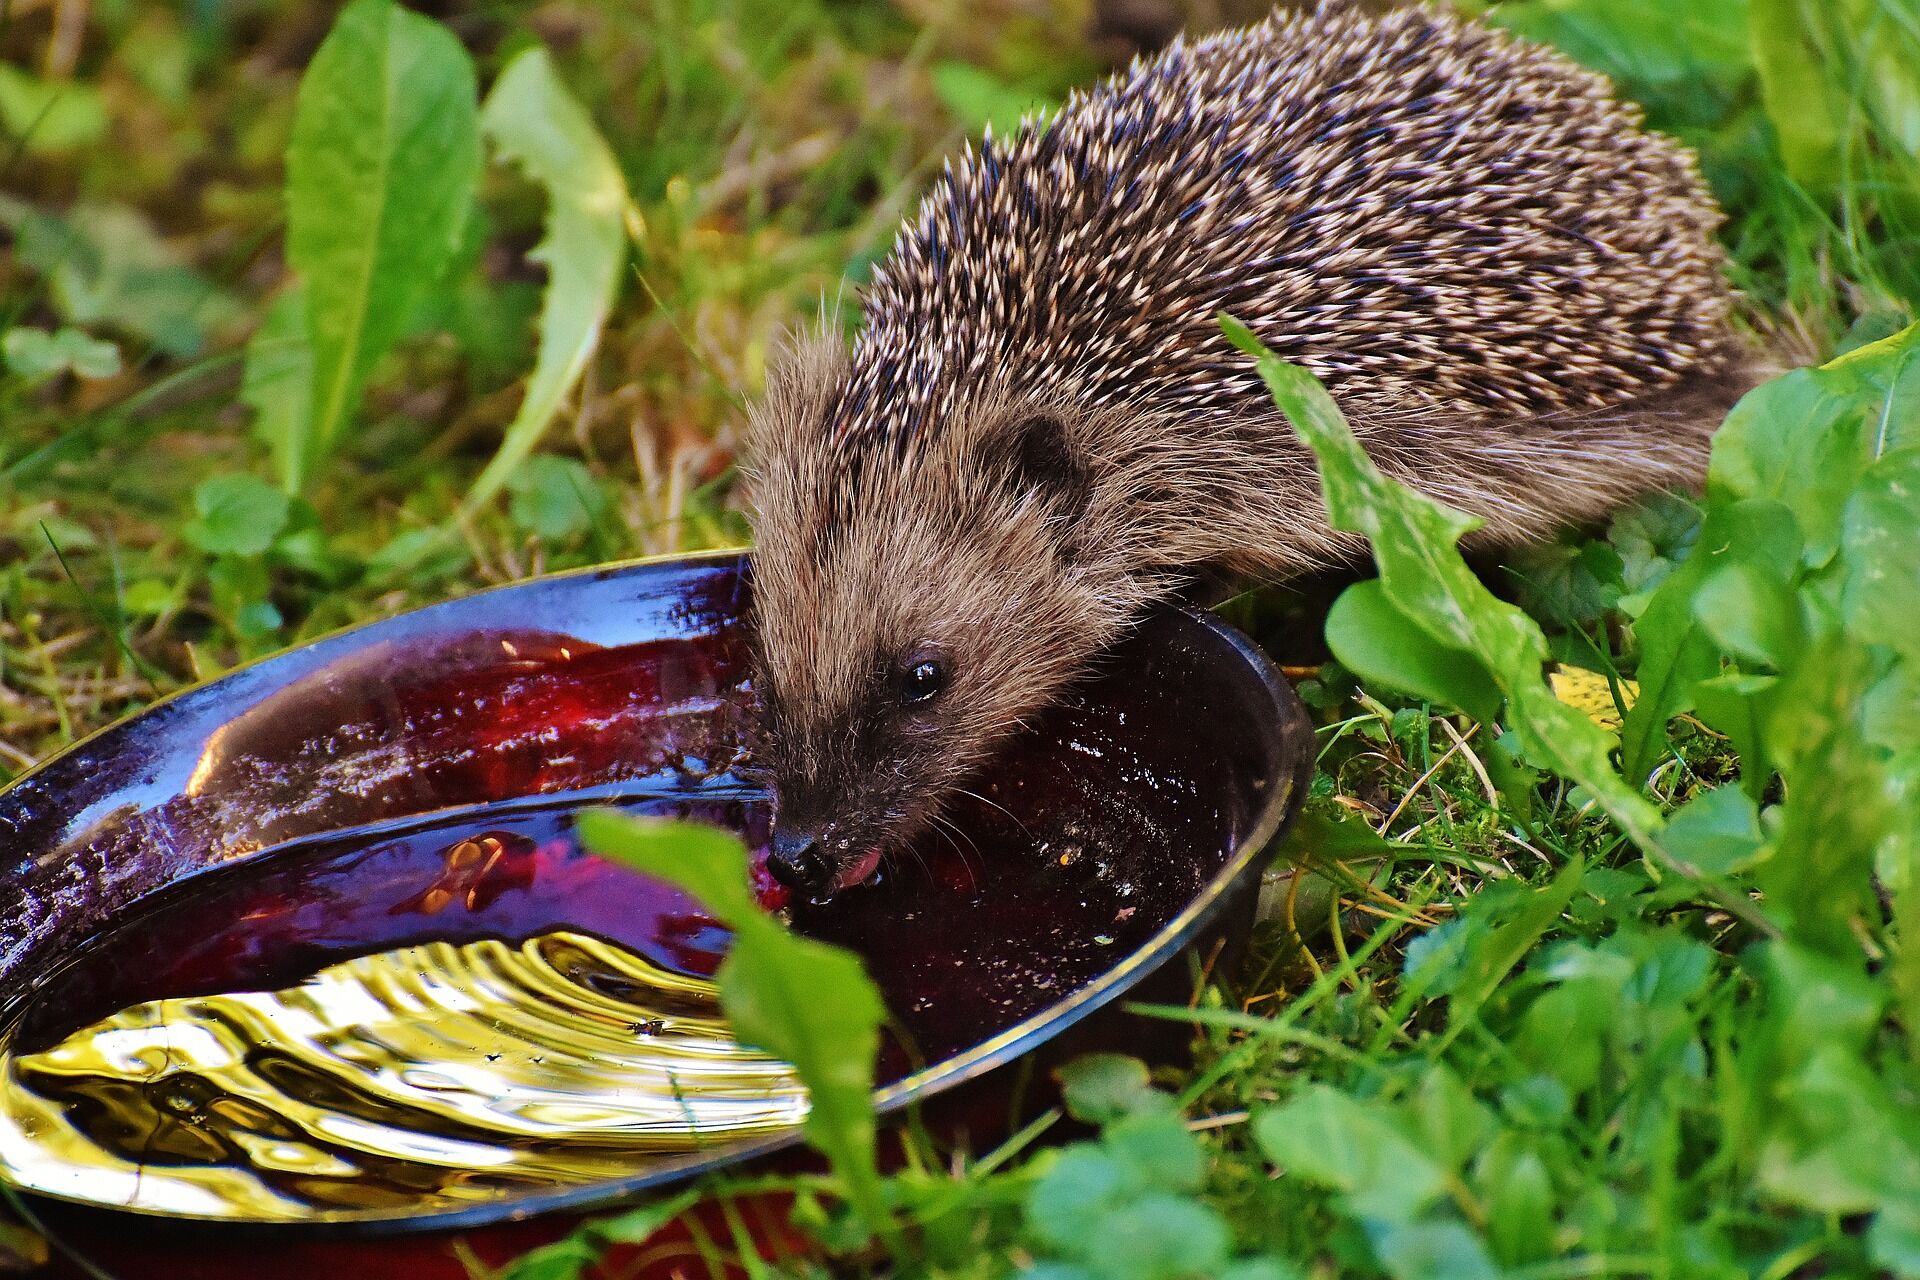 Hedgehog drinking from bowl on lawn